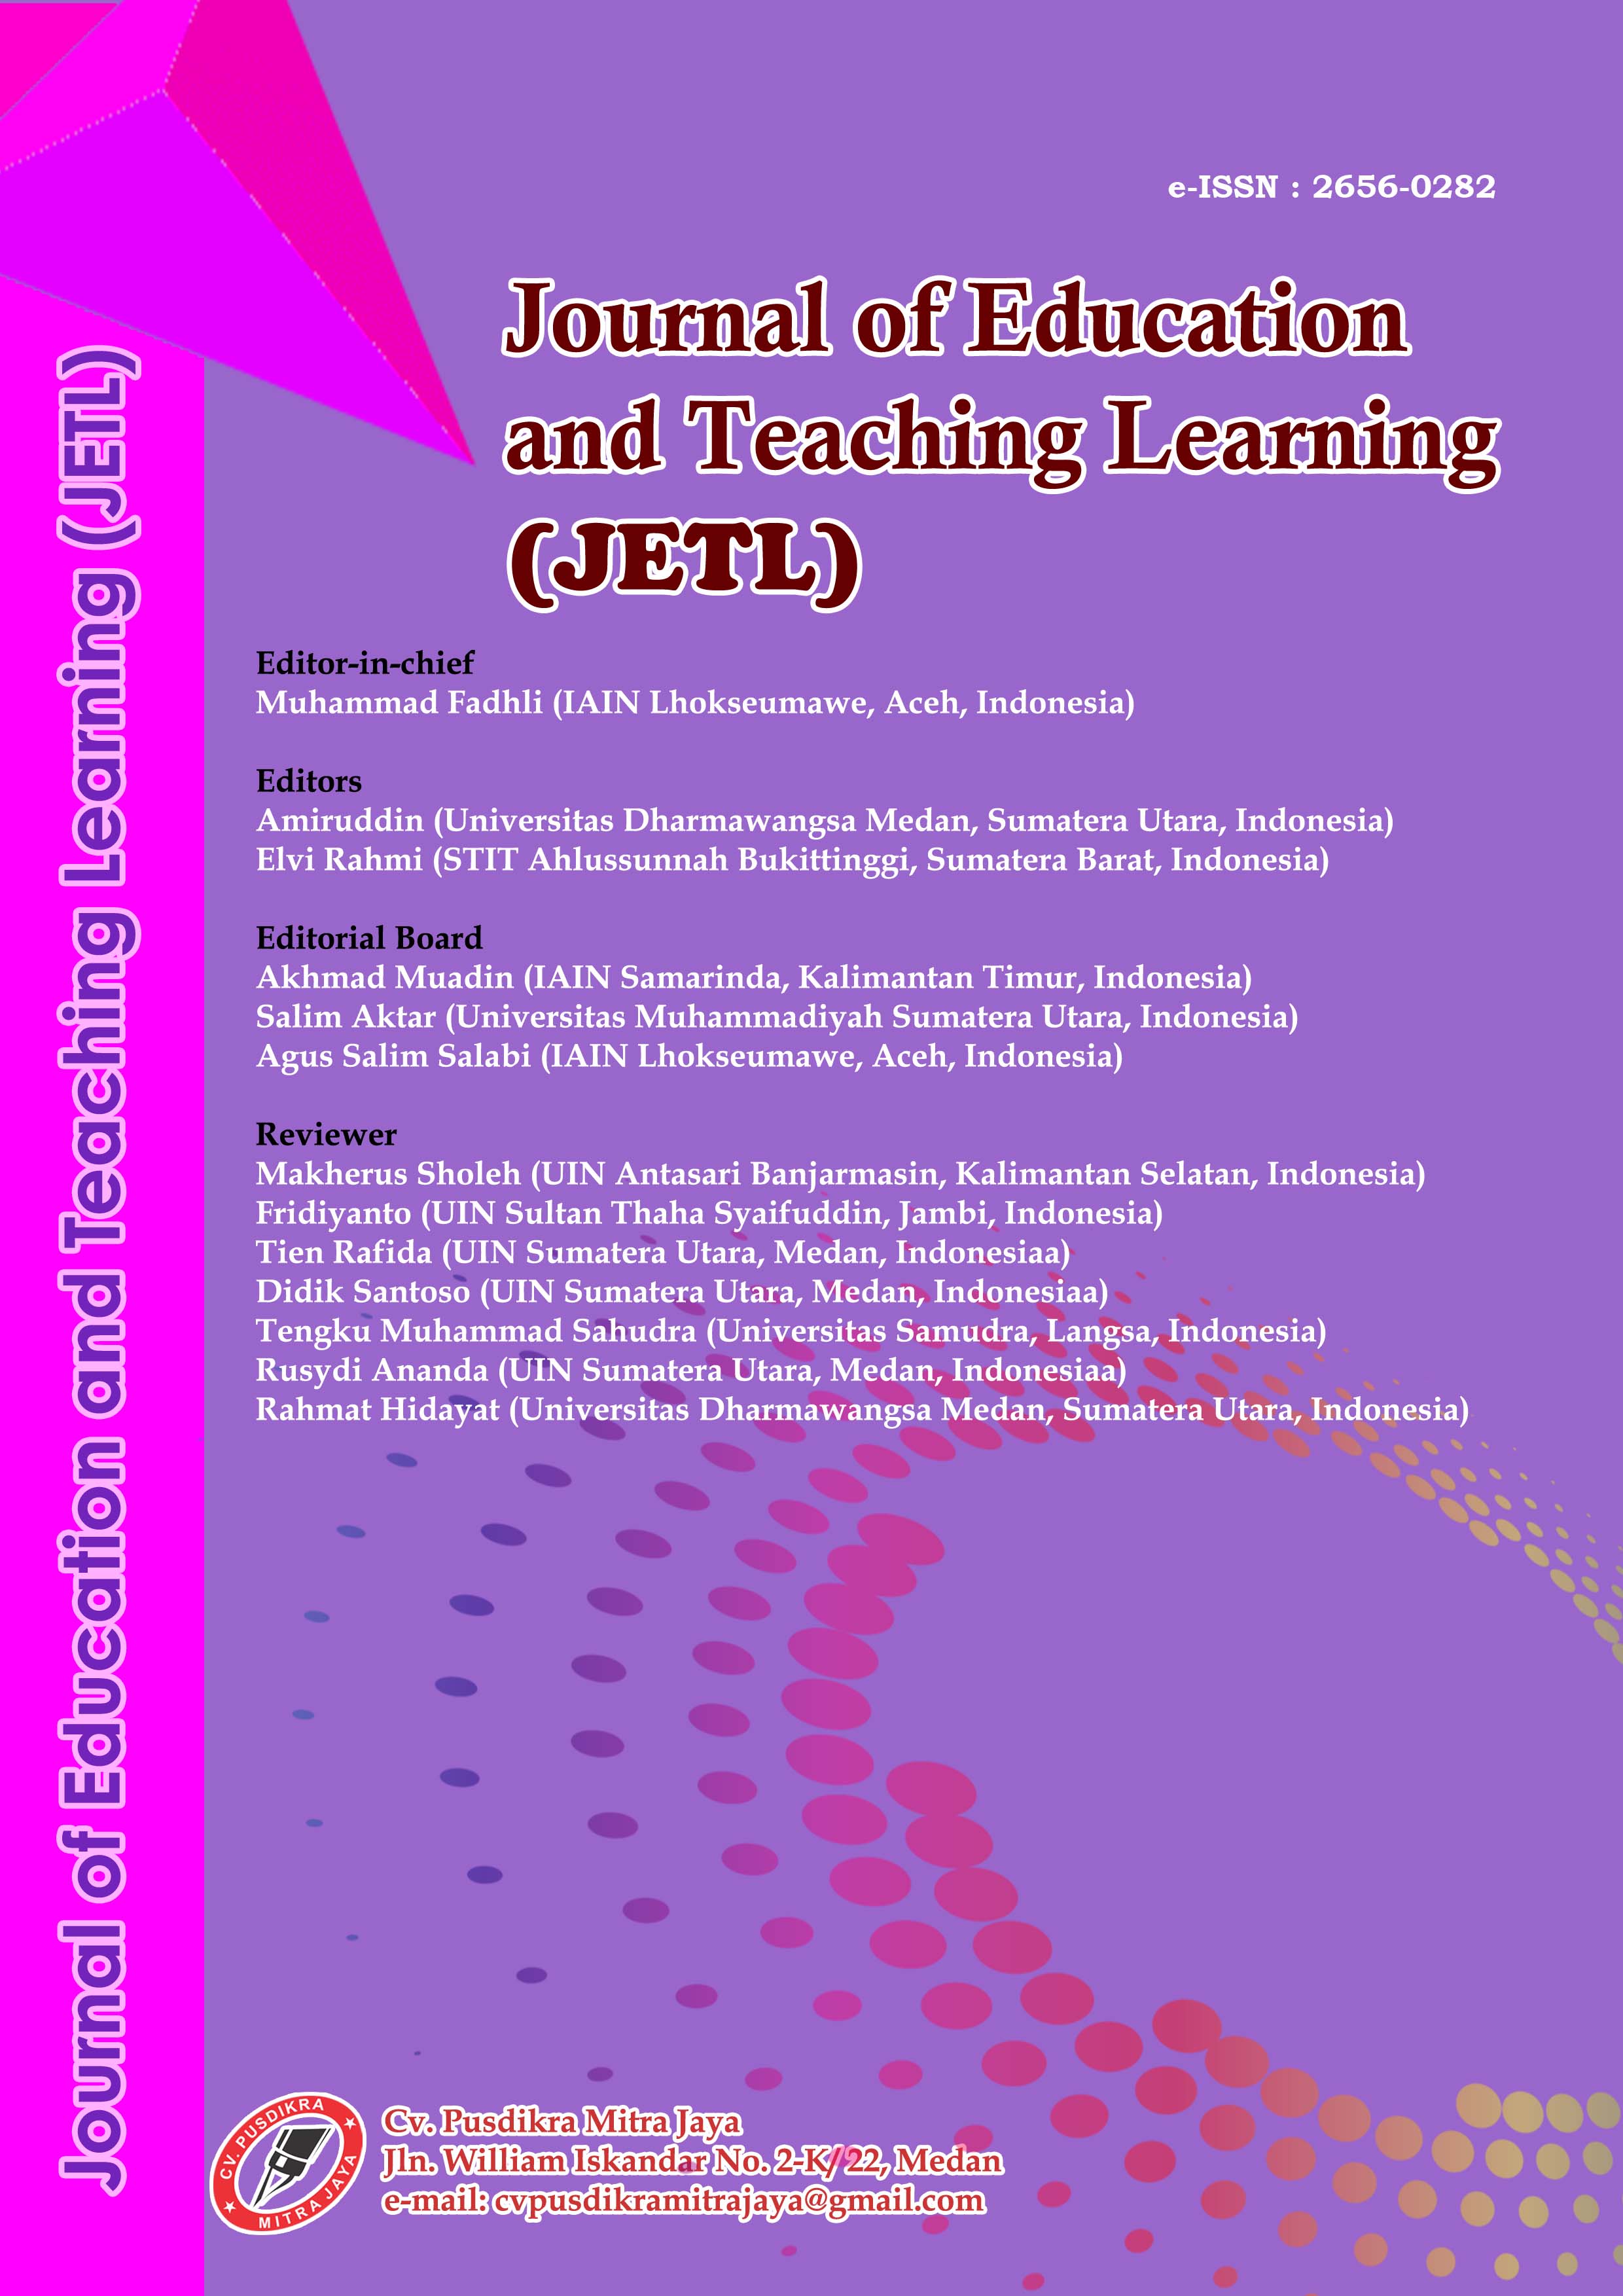 					View Vol. 4 No. 2 (2022): Journal of Education and Teaching Learning (JETL)_IN PRESS
				